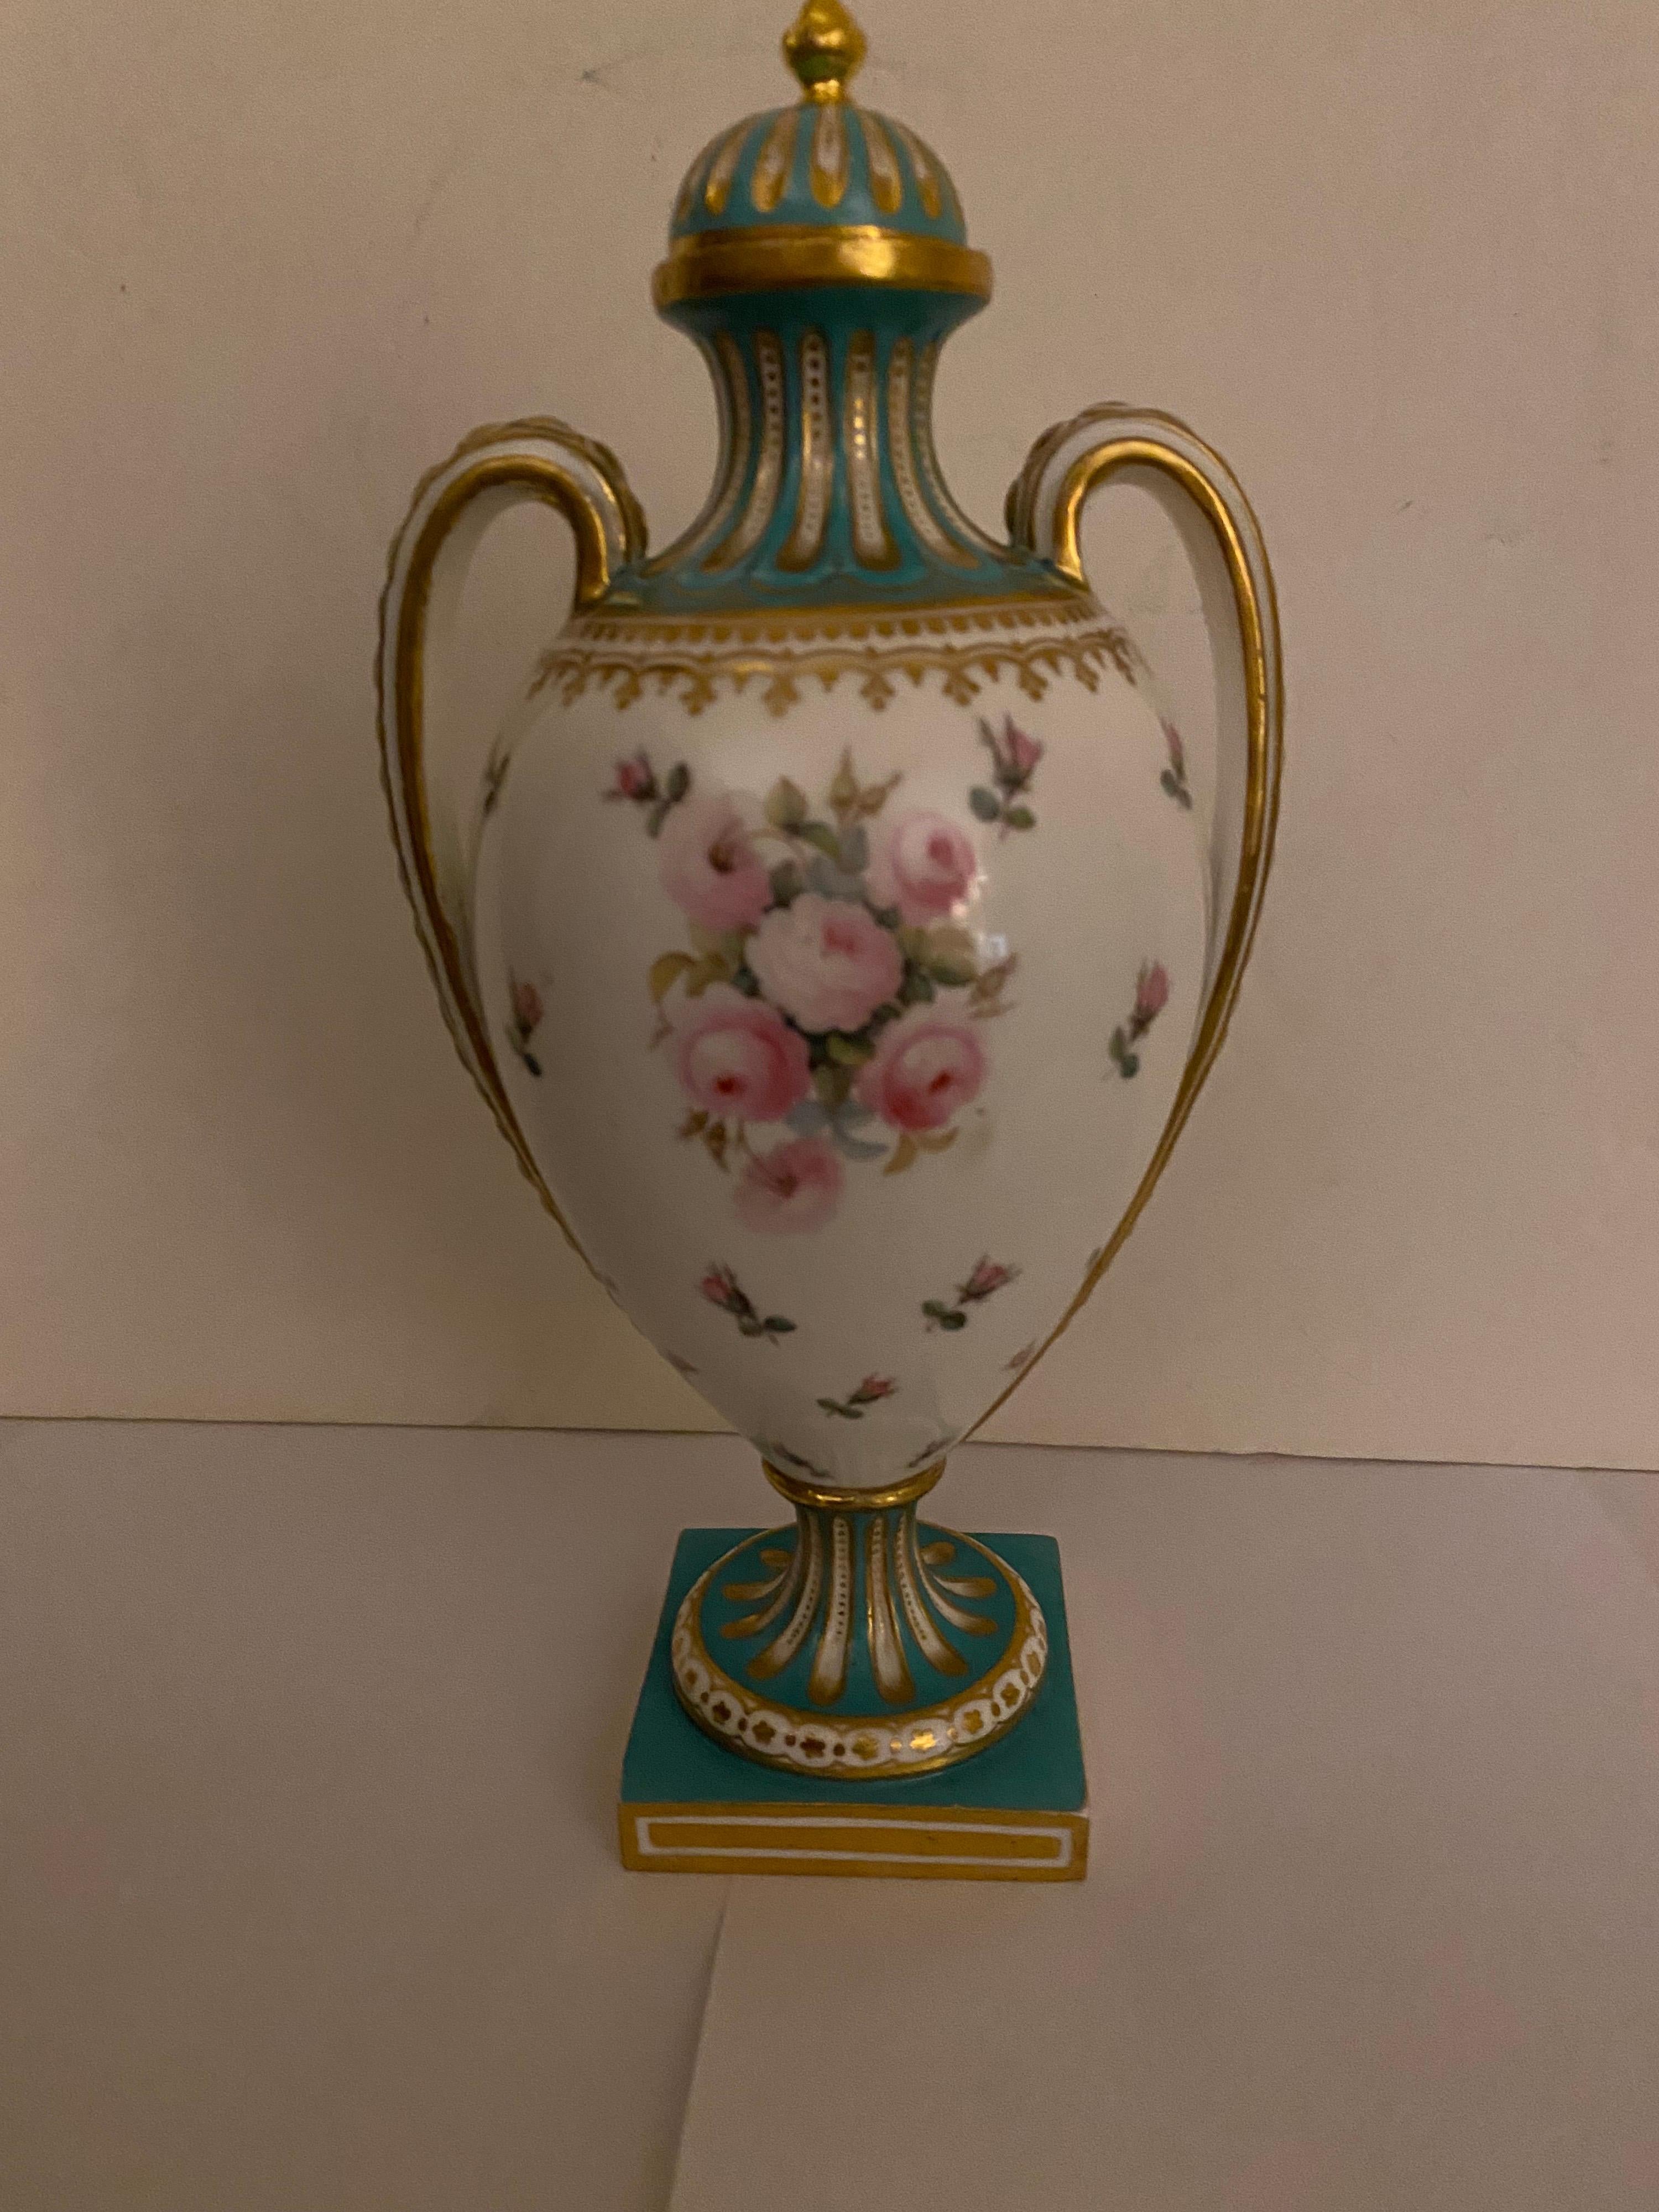 An elegant pair of 1860's hand painted English porcelain urns with lids, the diminutive urns with gilt decoration, are 8.5 inches tall to the tip of the finial on the urn. The domed lid resting on the floral bulbous body with pink rose cartouches on